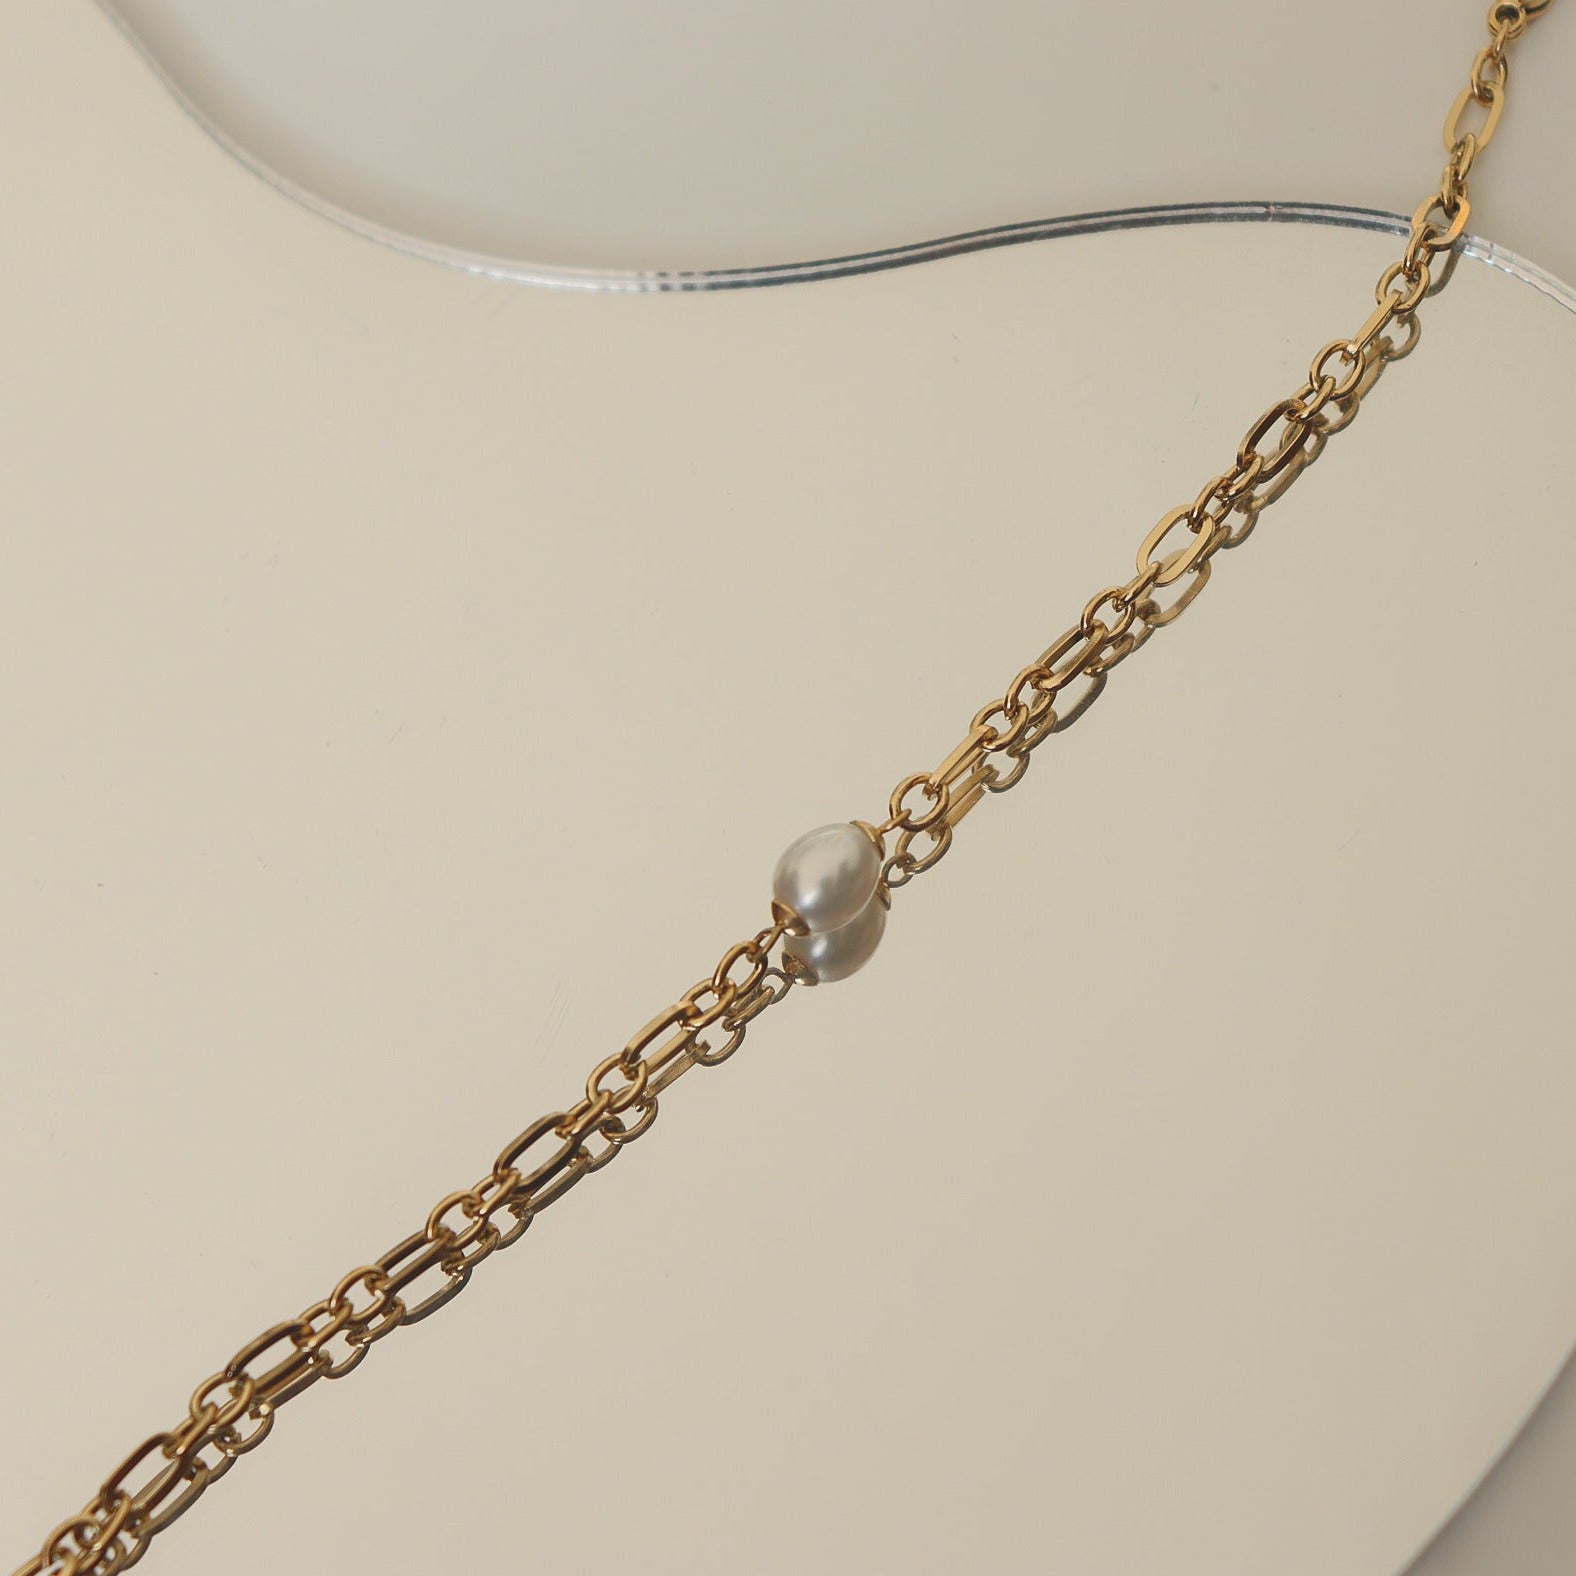 veryday Elegance: Gold Plated Chain Bracelets for Stylish StatementsStylish and Water-Resistant Gold Plated Bracelets- Perfect timeless necessary for every occasion